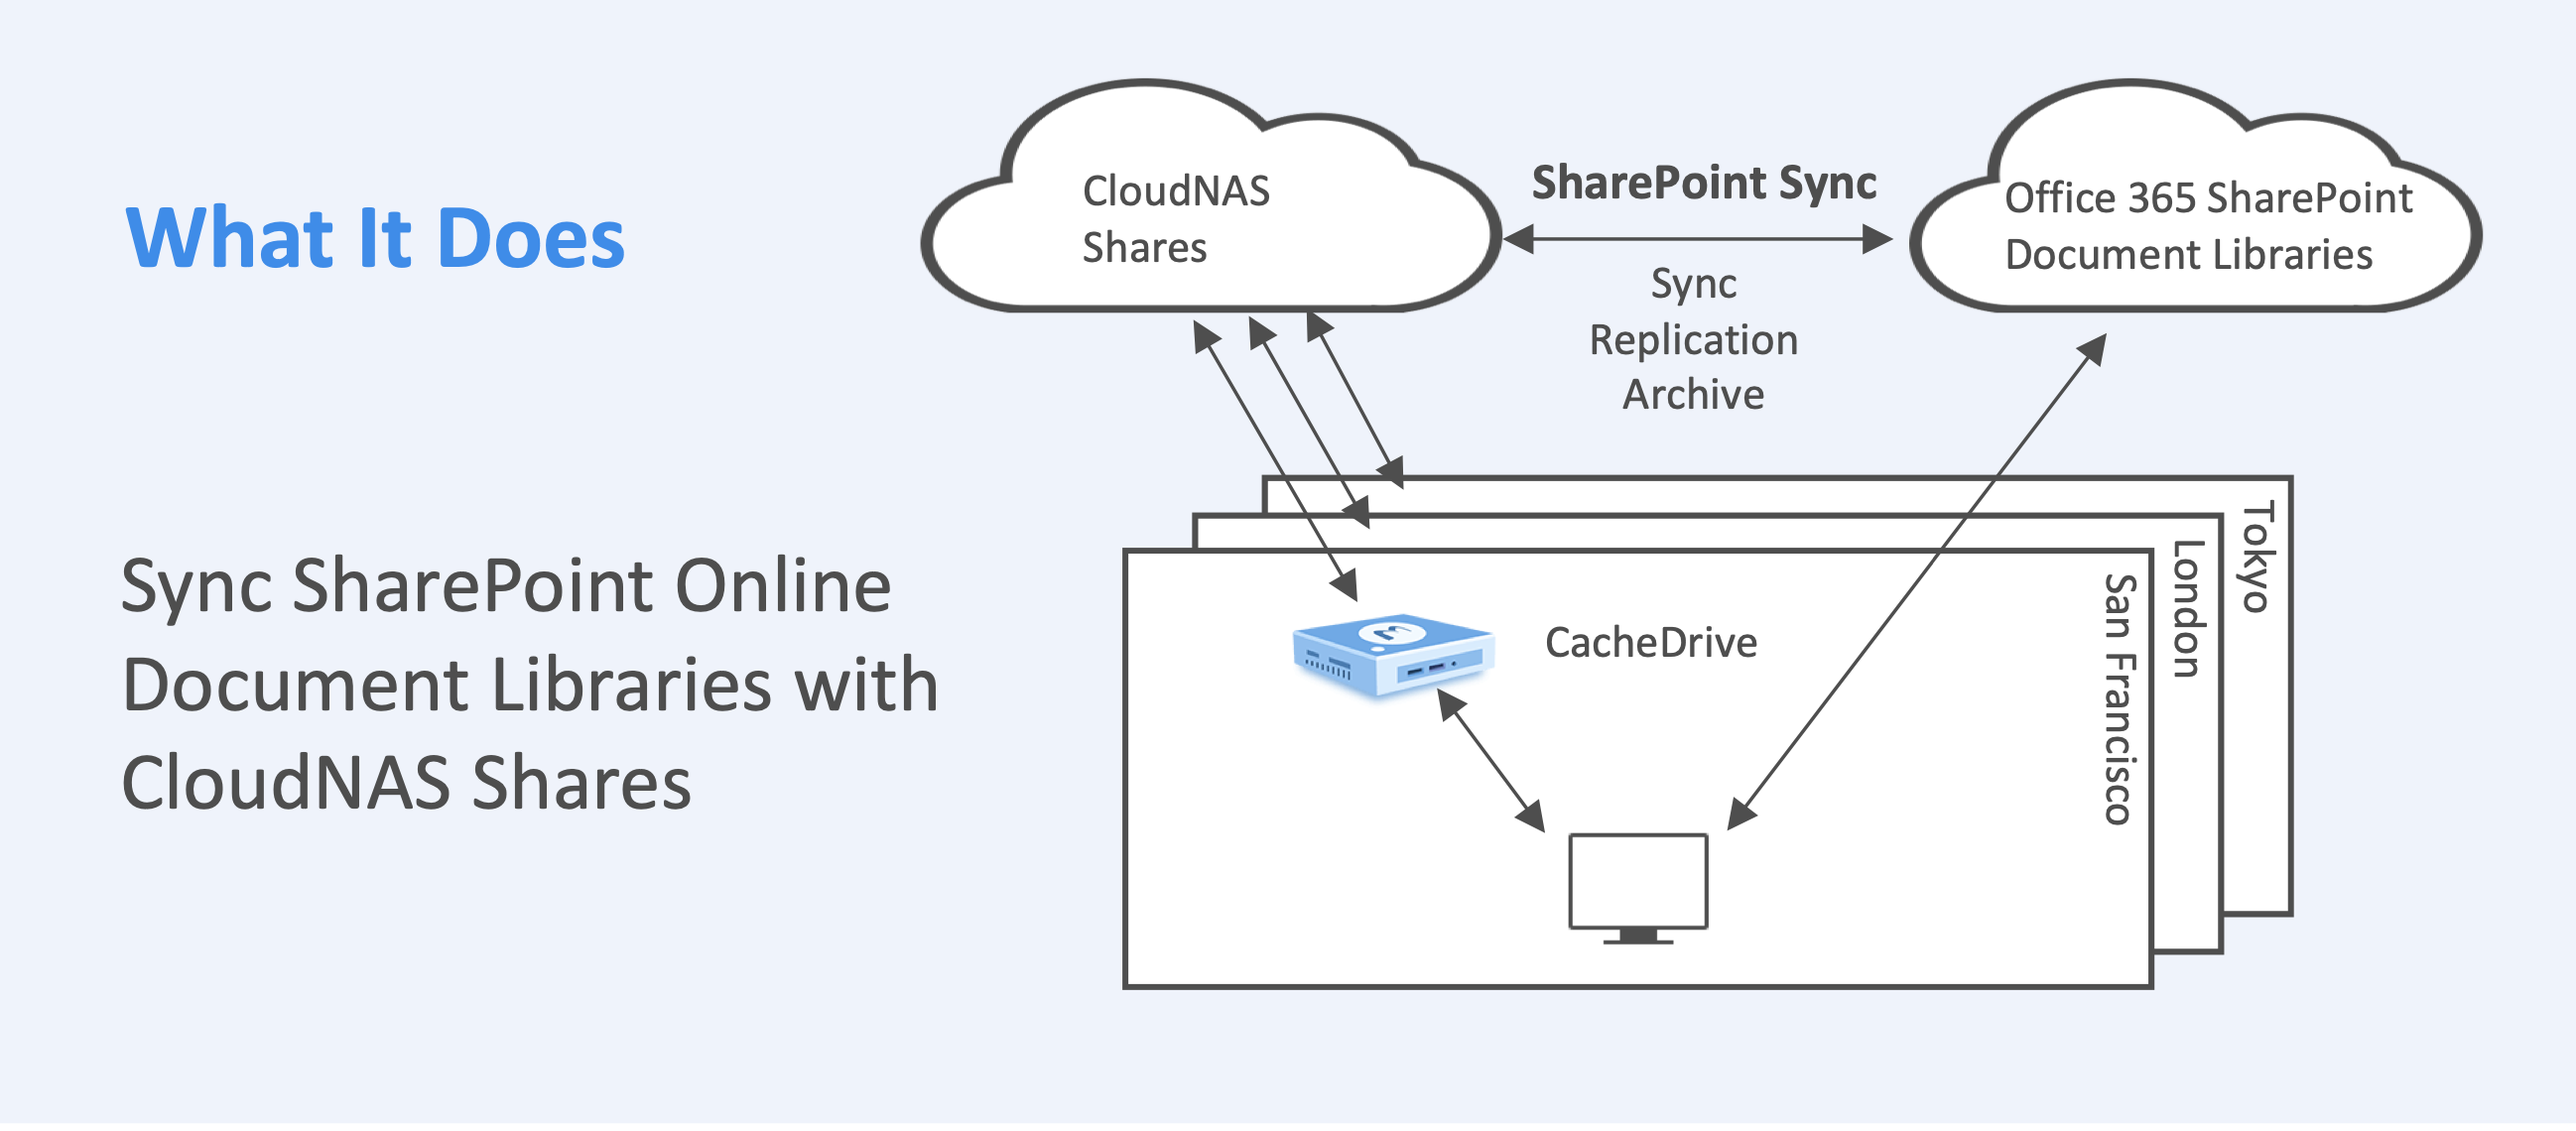 How to sync Cloud NAS with Microsoft SharePoint document libraries via sync, replication, and archive